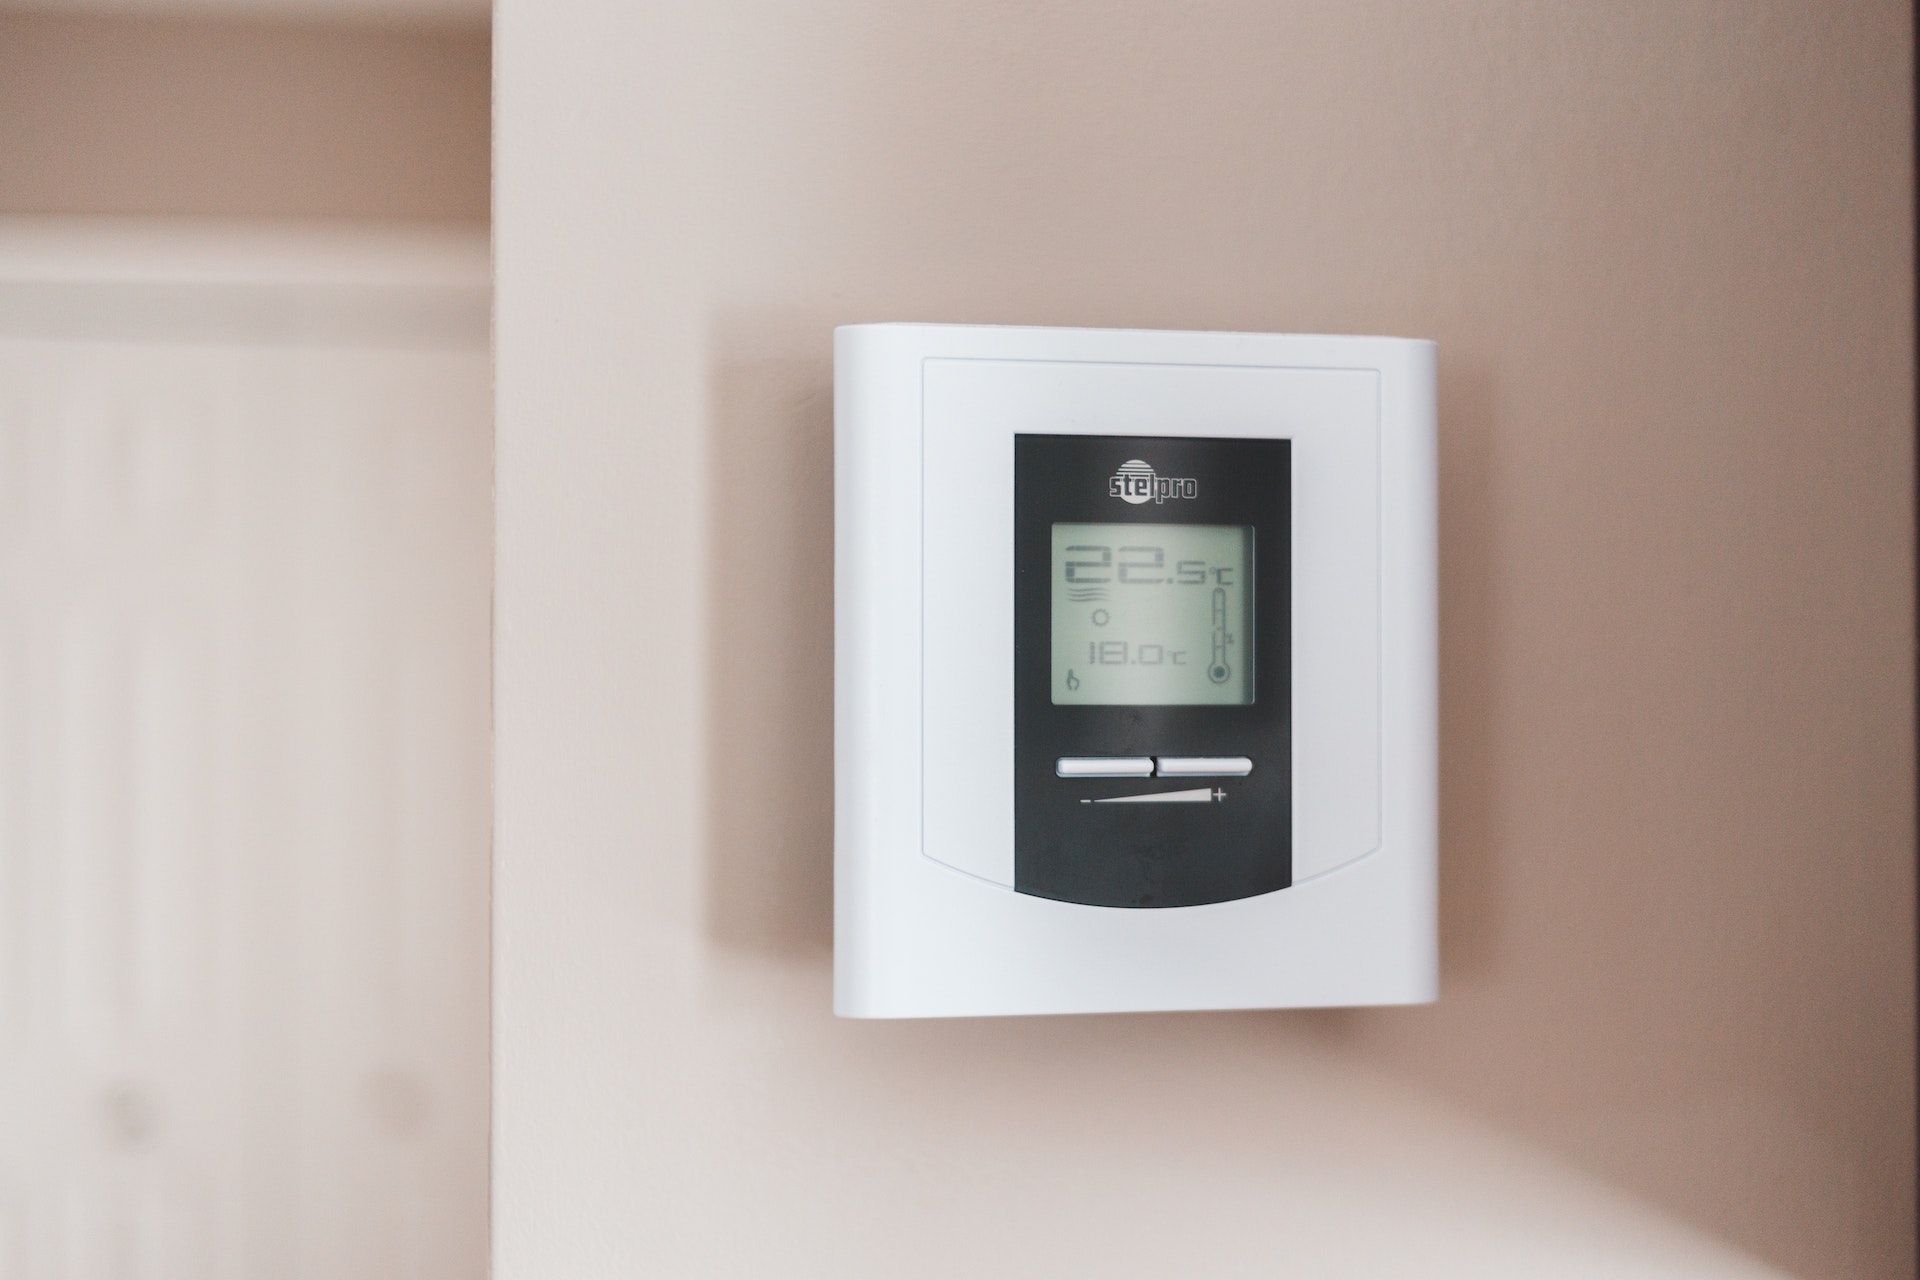 What Is The Perfect Home Temperature?